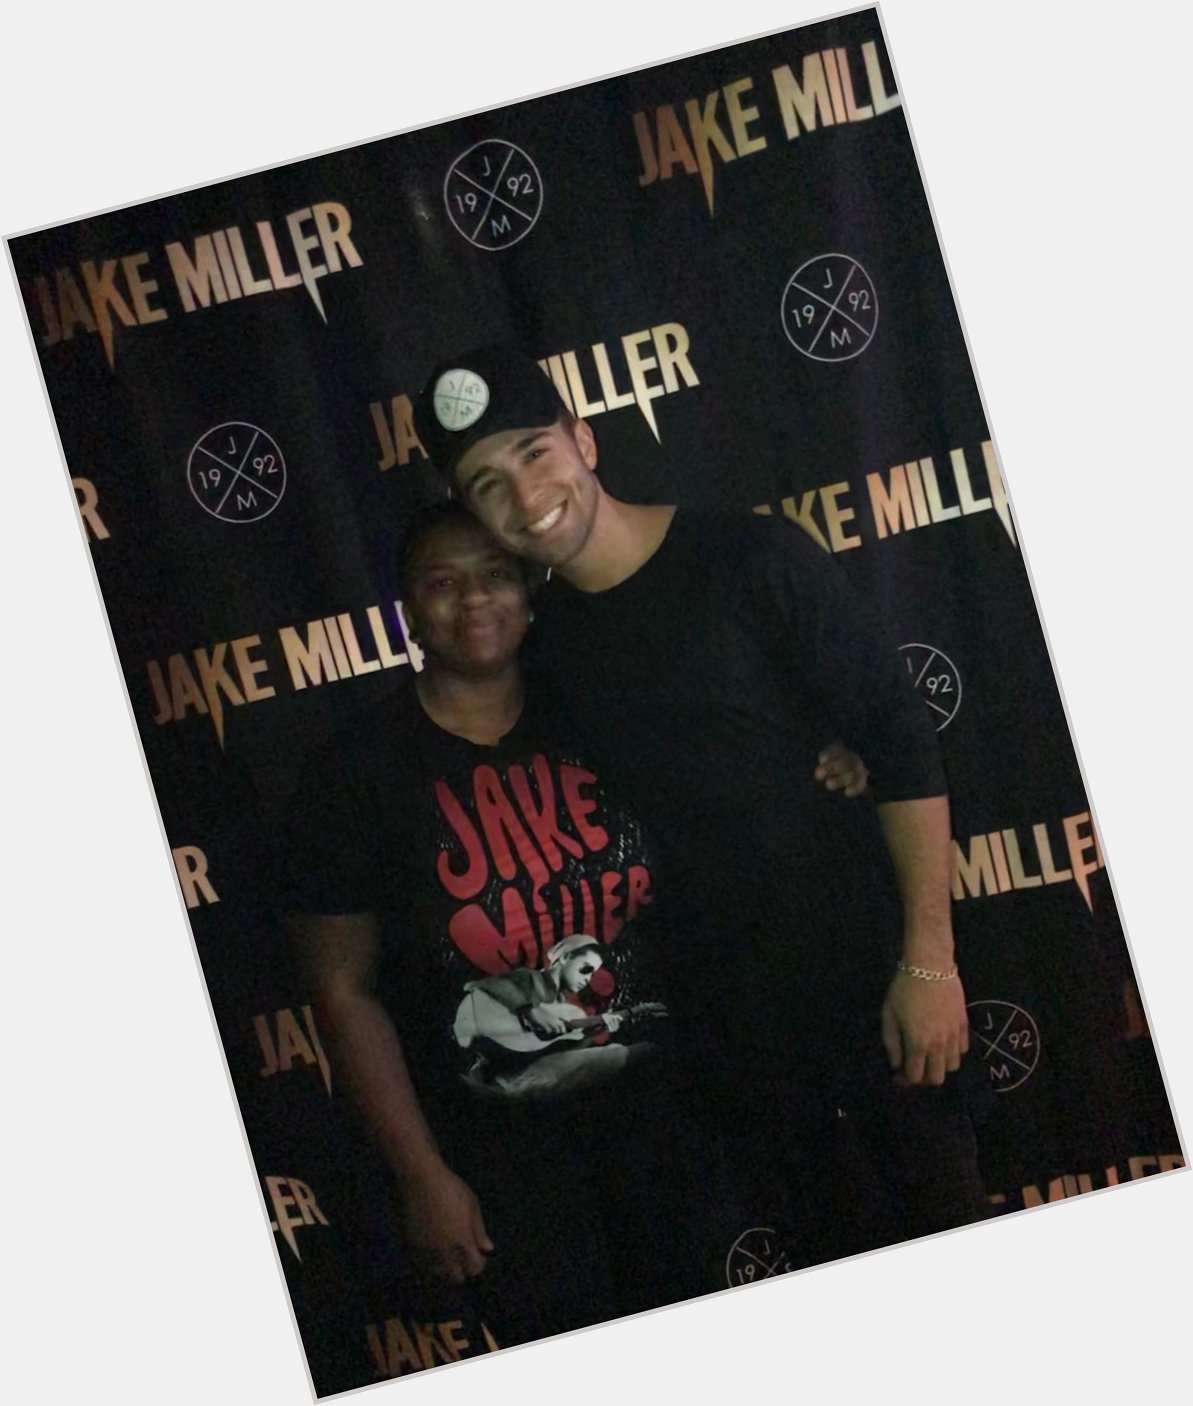 HAPPY BIRTHDAY JAKE MILLER! You deserve the best, enjoy your day and week!     